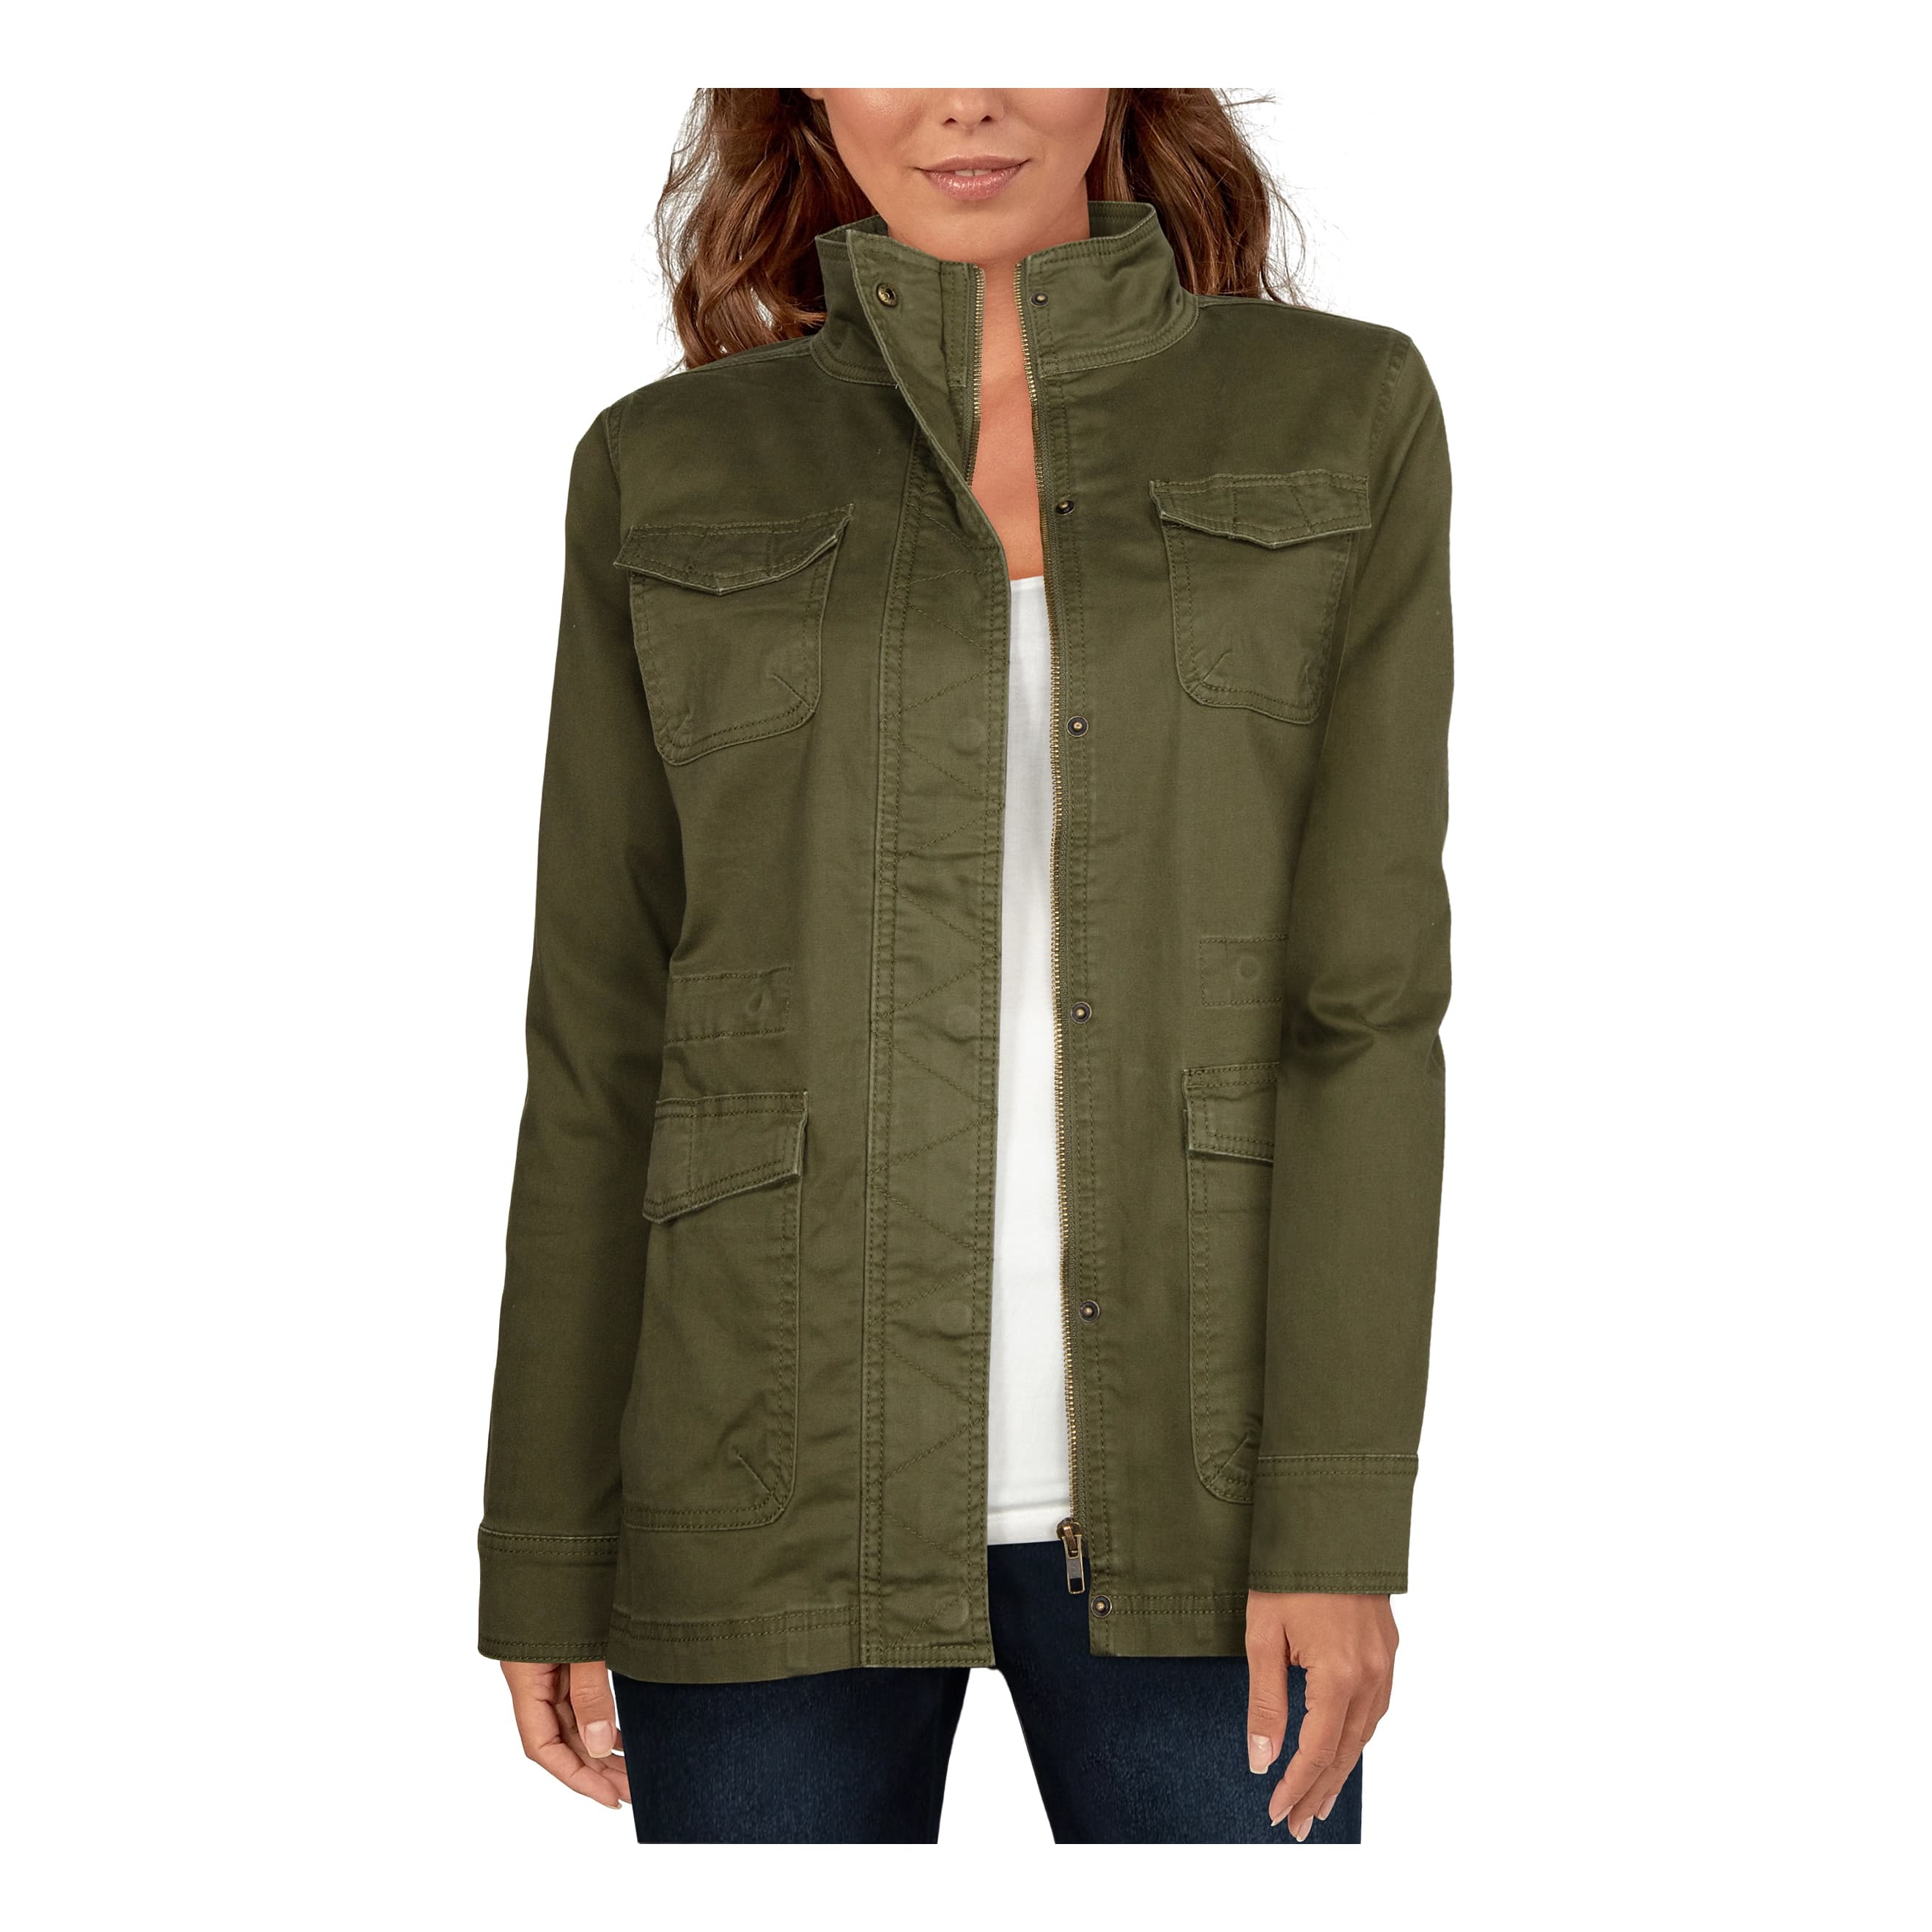 Natural Reflections® Women’s Utility Jacket - Dark Olive